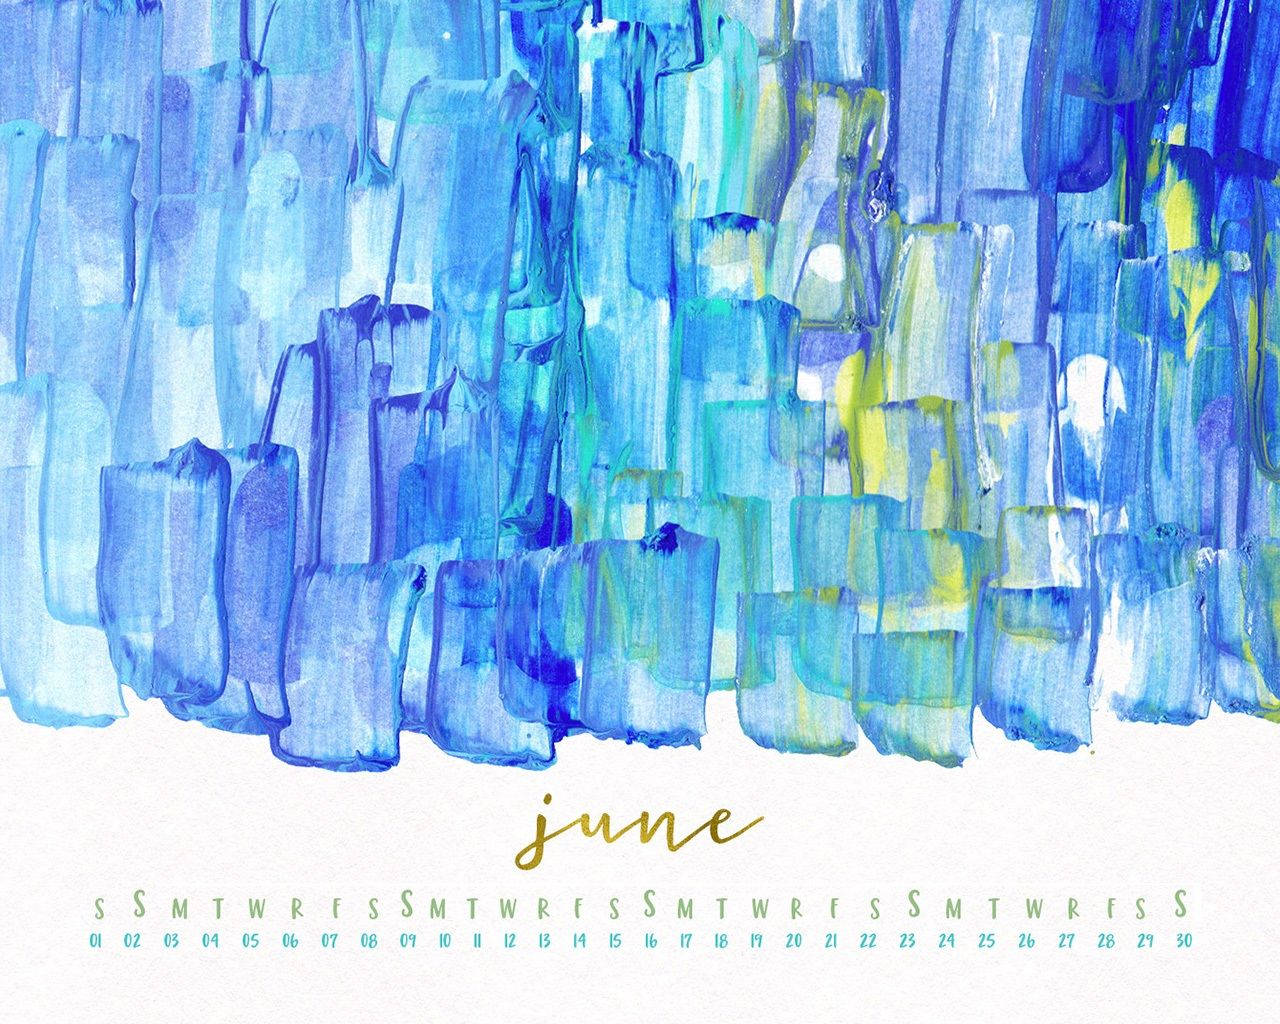 June 2018 - A Blue Painting Of Reflection And Introspection